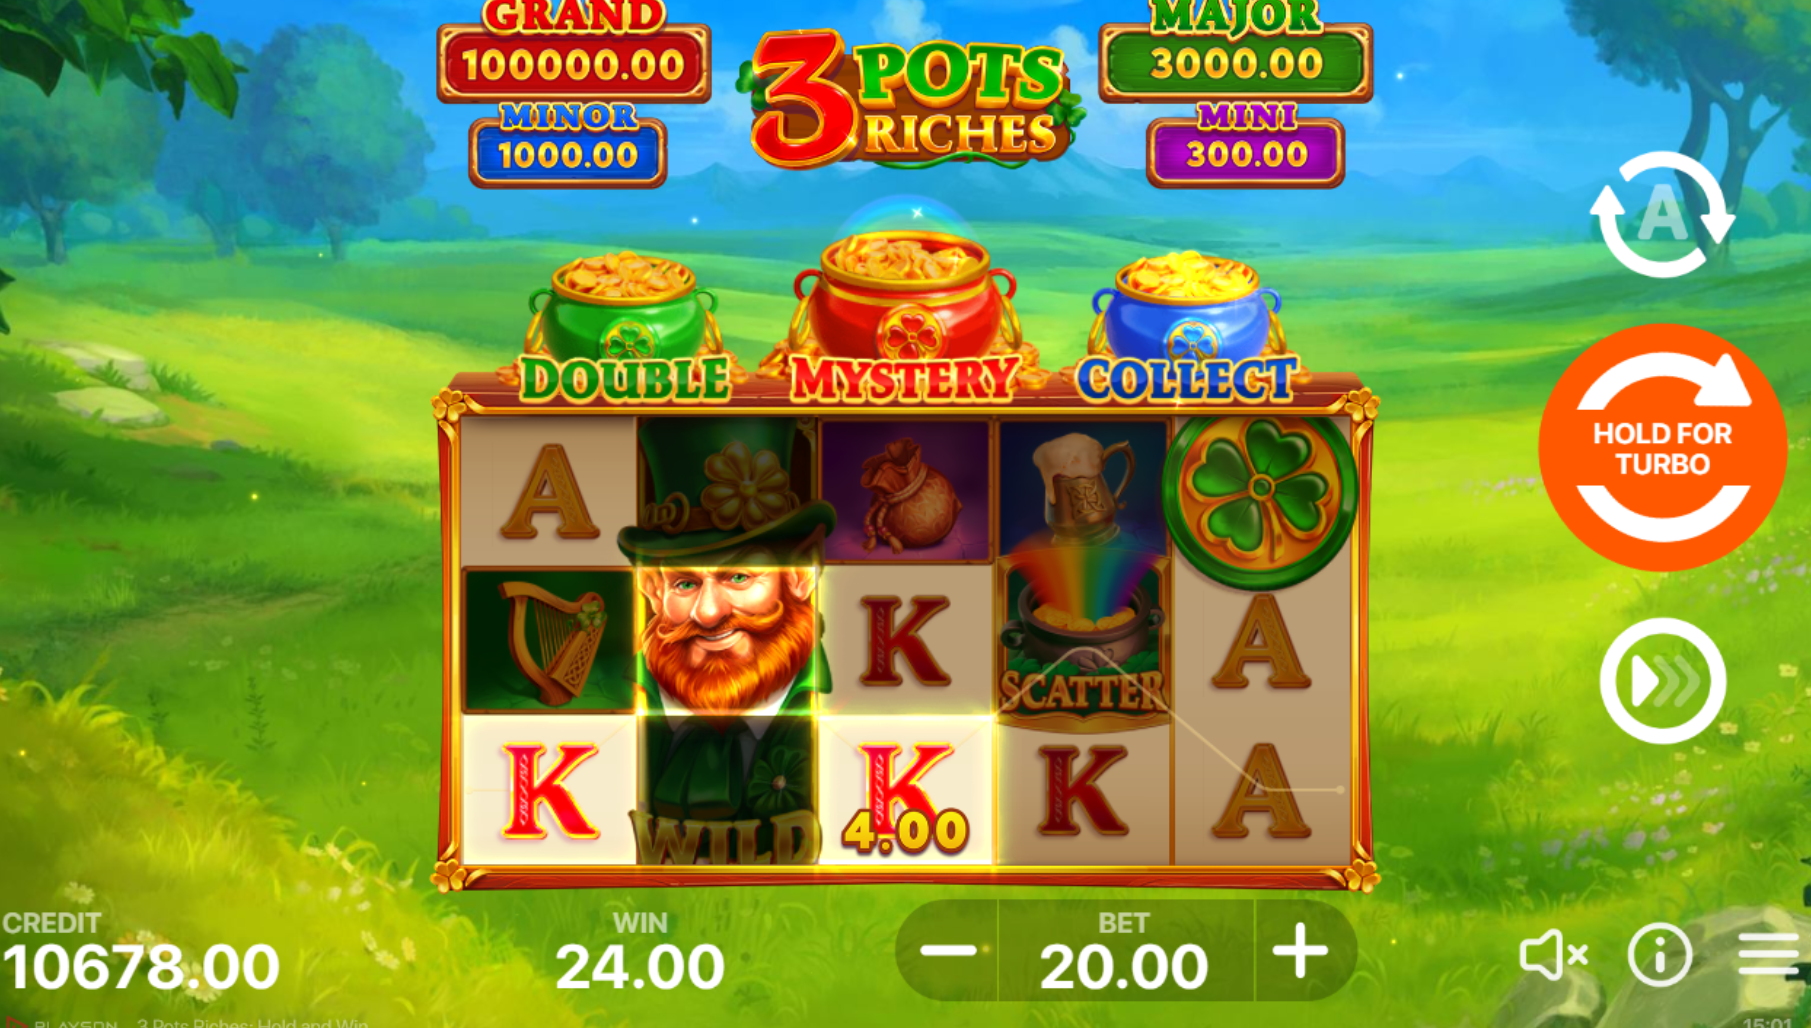 3 pots riches hold and win big win